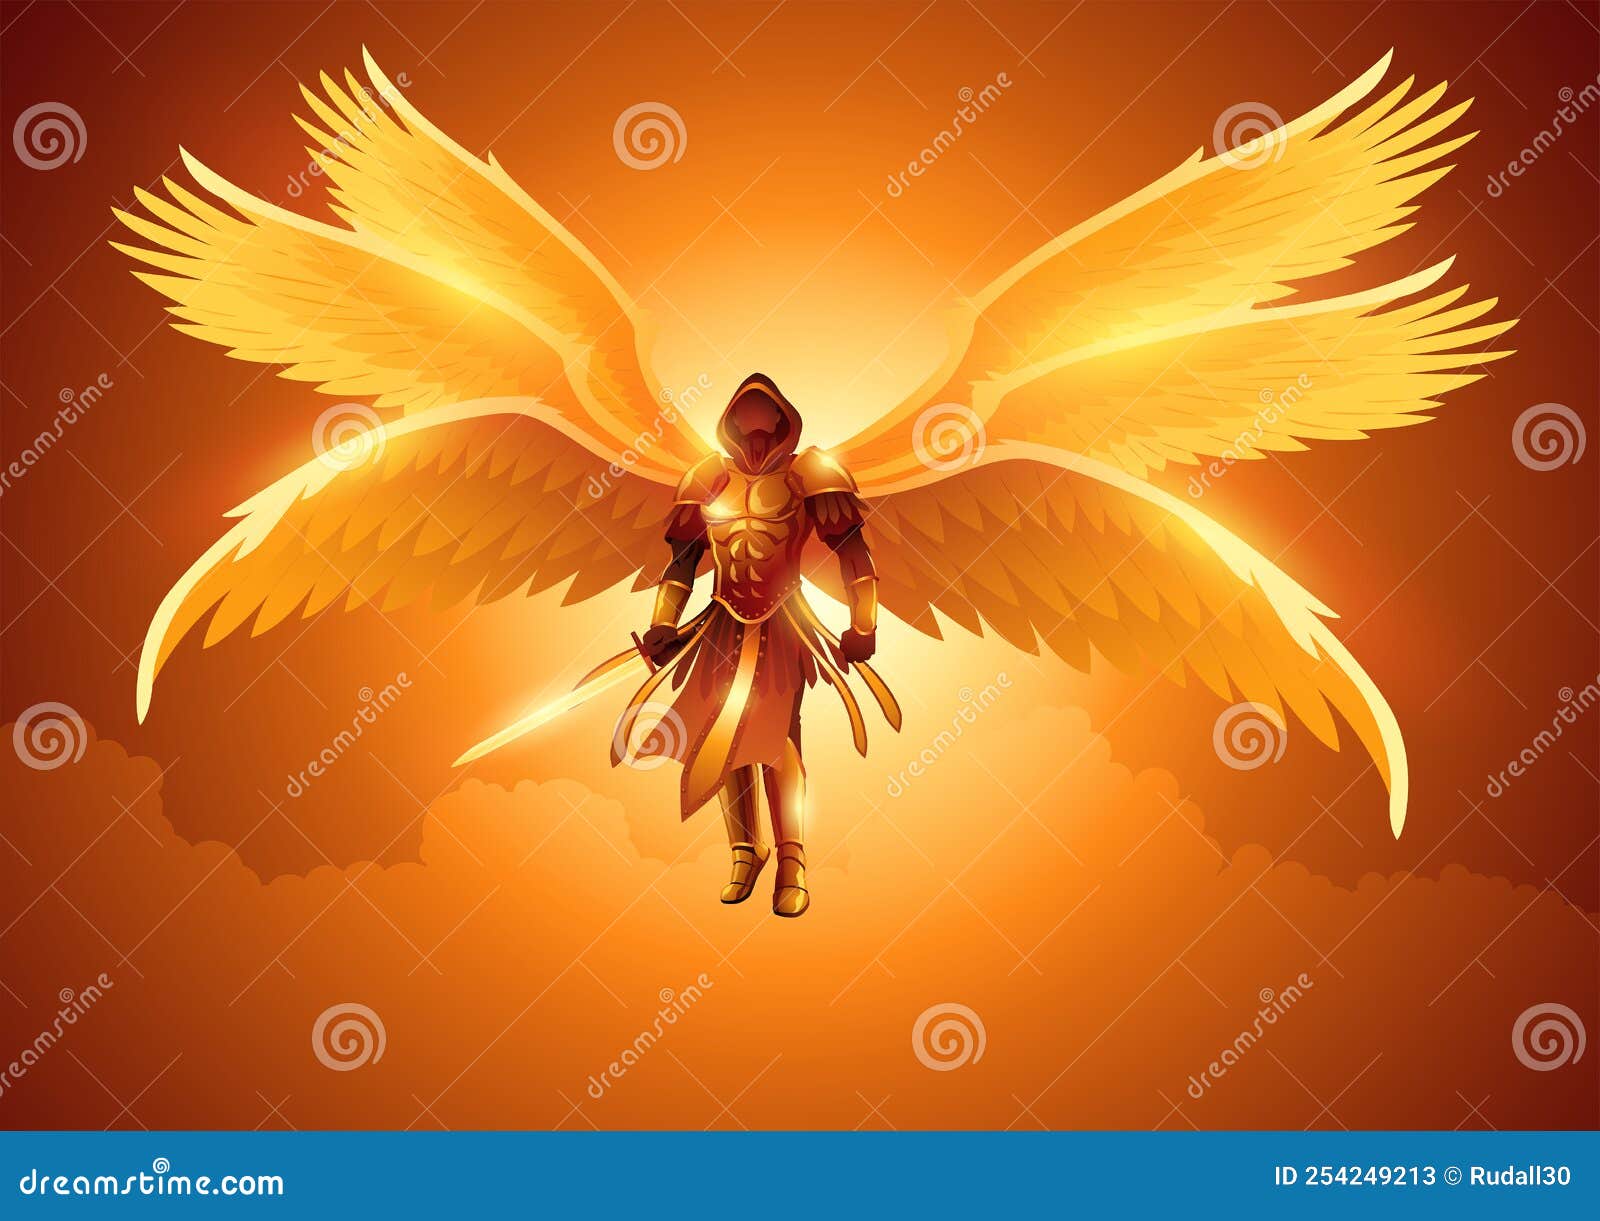 archangel with six wings holding a sword